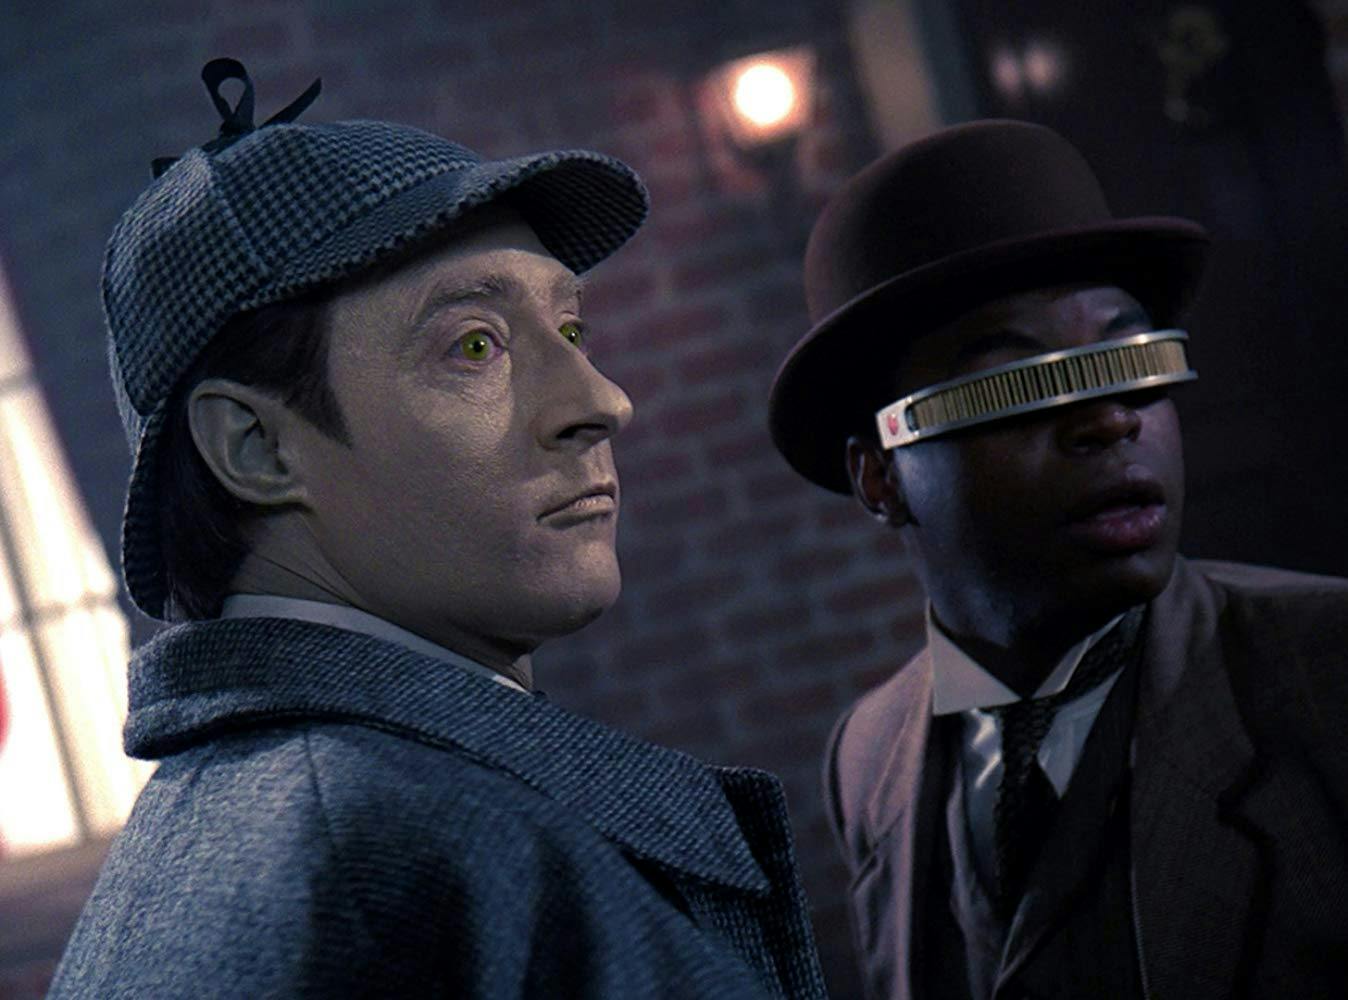 Data and Geordi don Sherlock and Watson costumes while in the holodeck in 'Elementary, Dear Data'